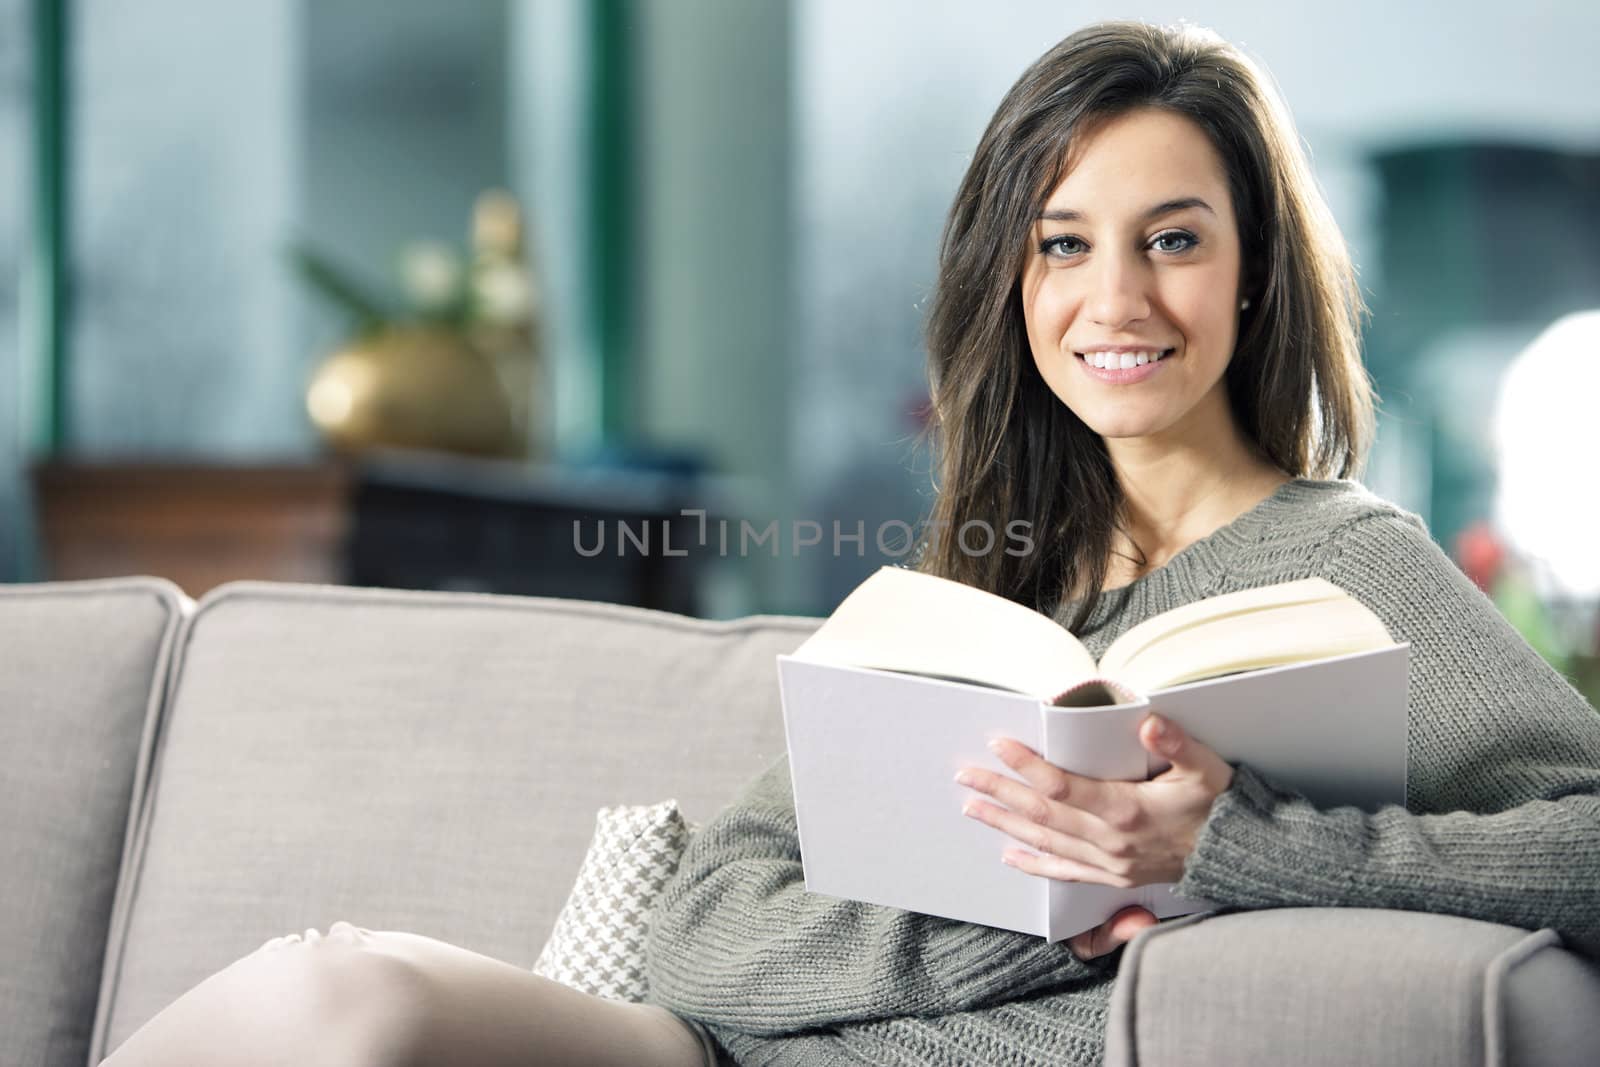 Portrait of a happy young woman lying on couch with book